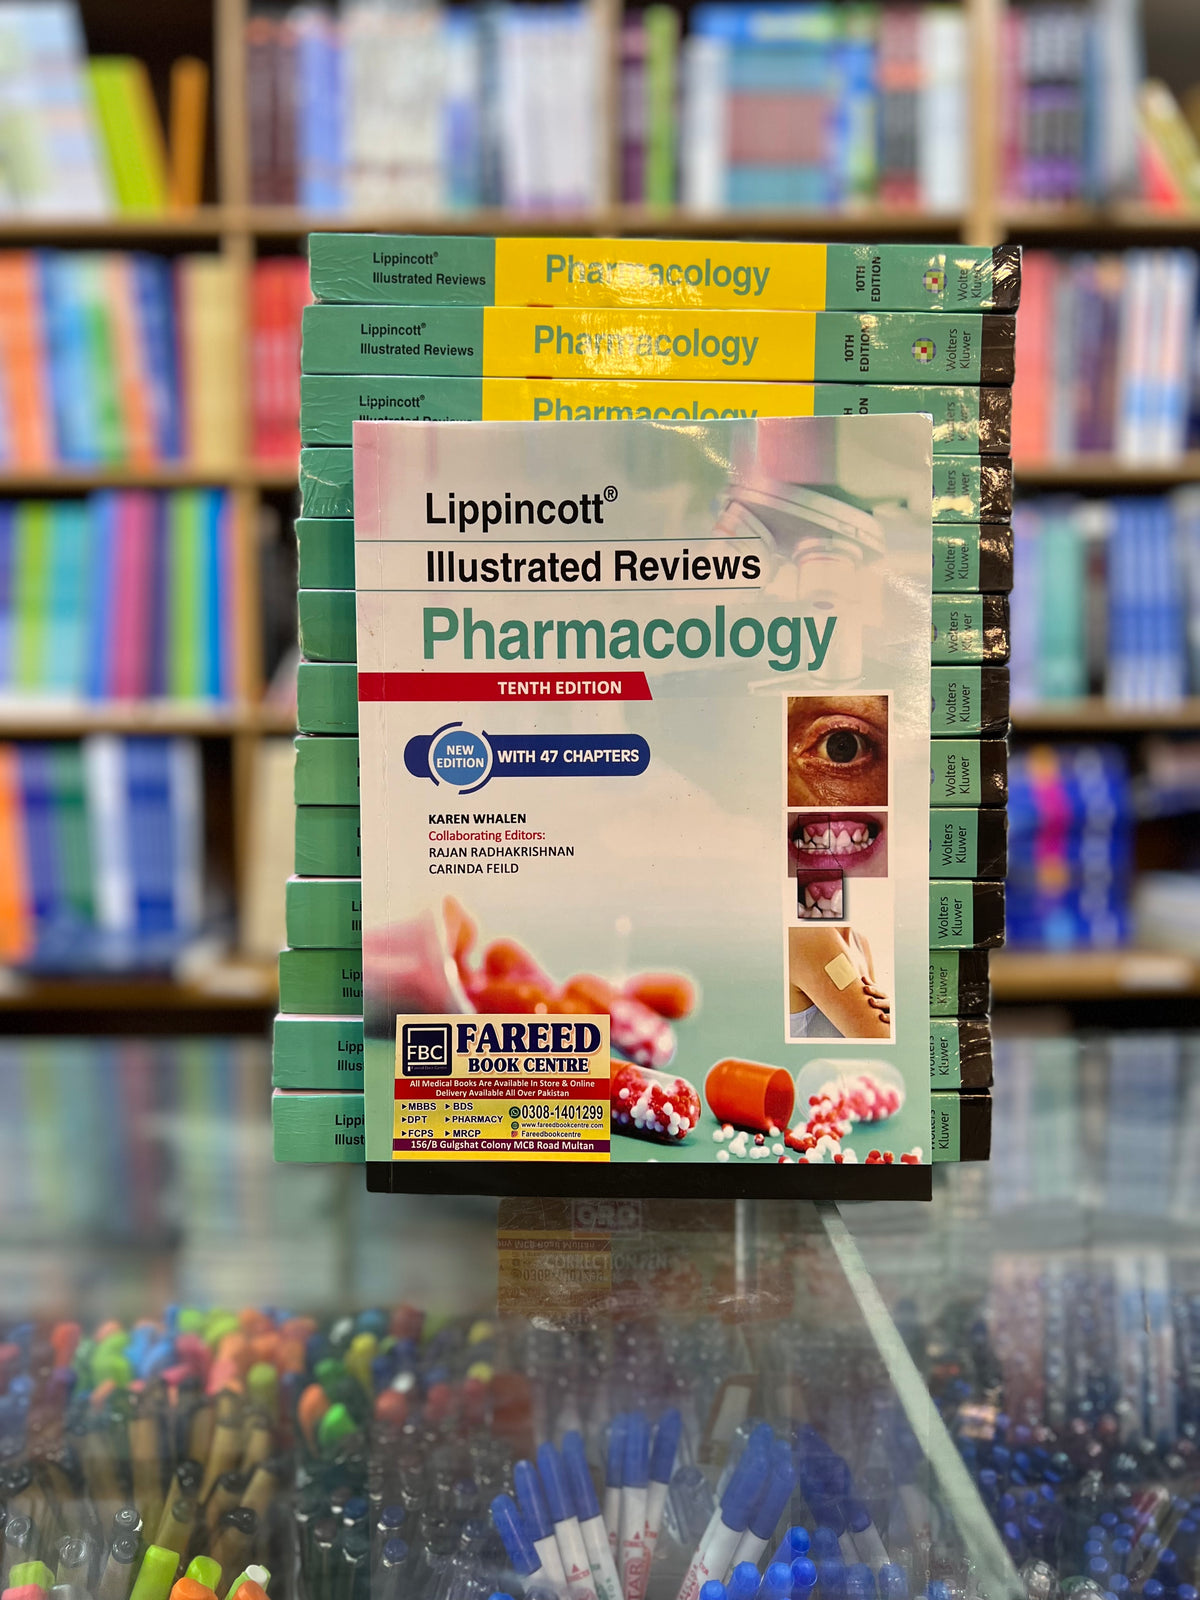 LIPPINCOTT Illustrated Reviews PHARMACOLOGY 10th EDITION